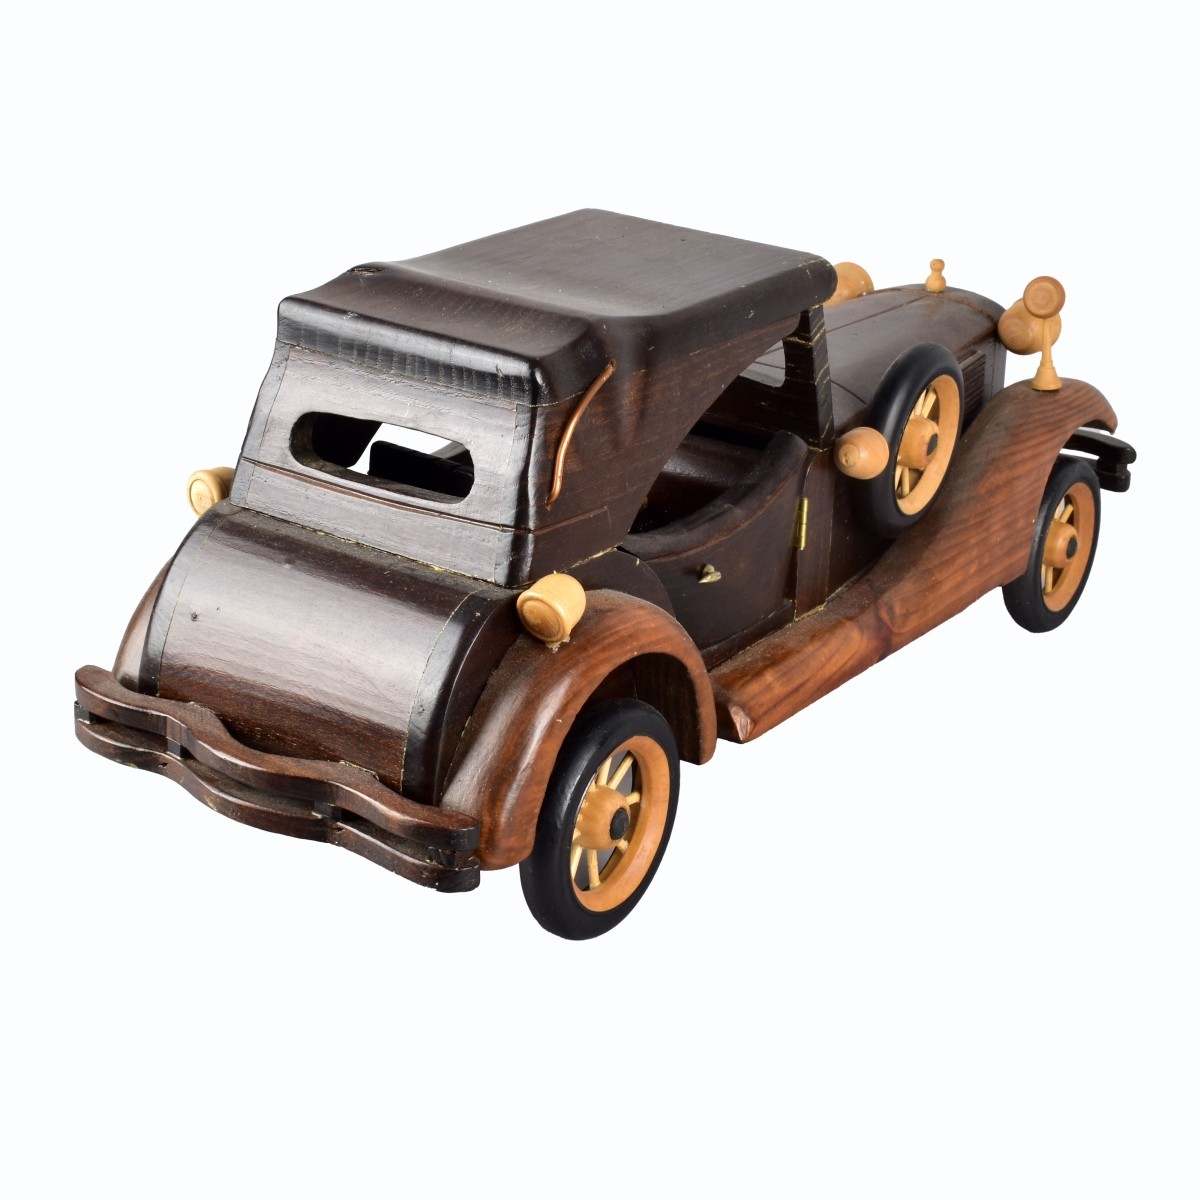 Vintage Wooden Model of a Classic Car